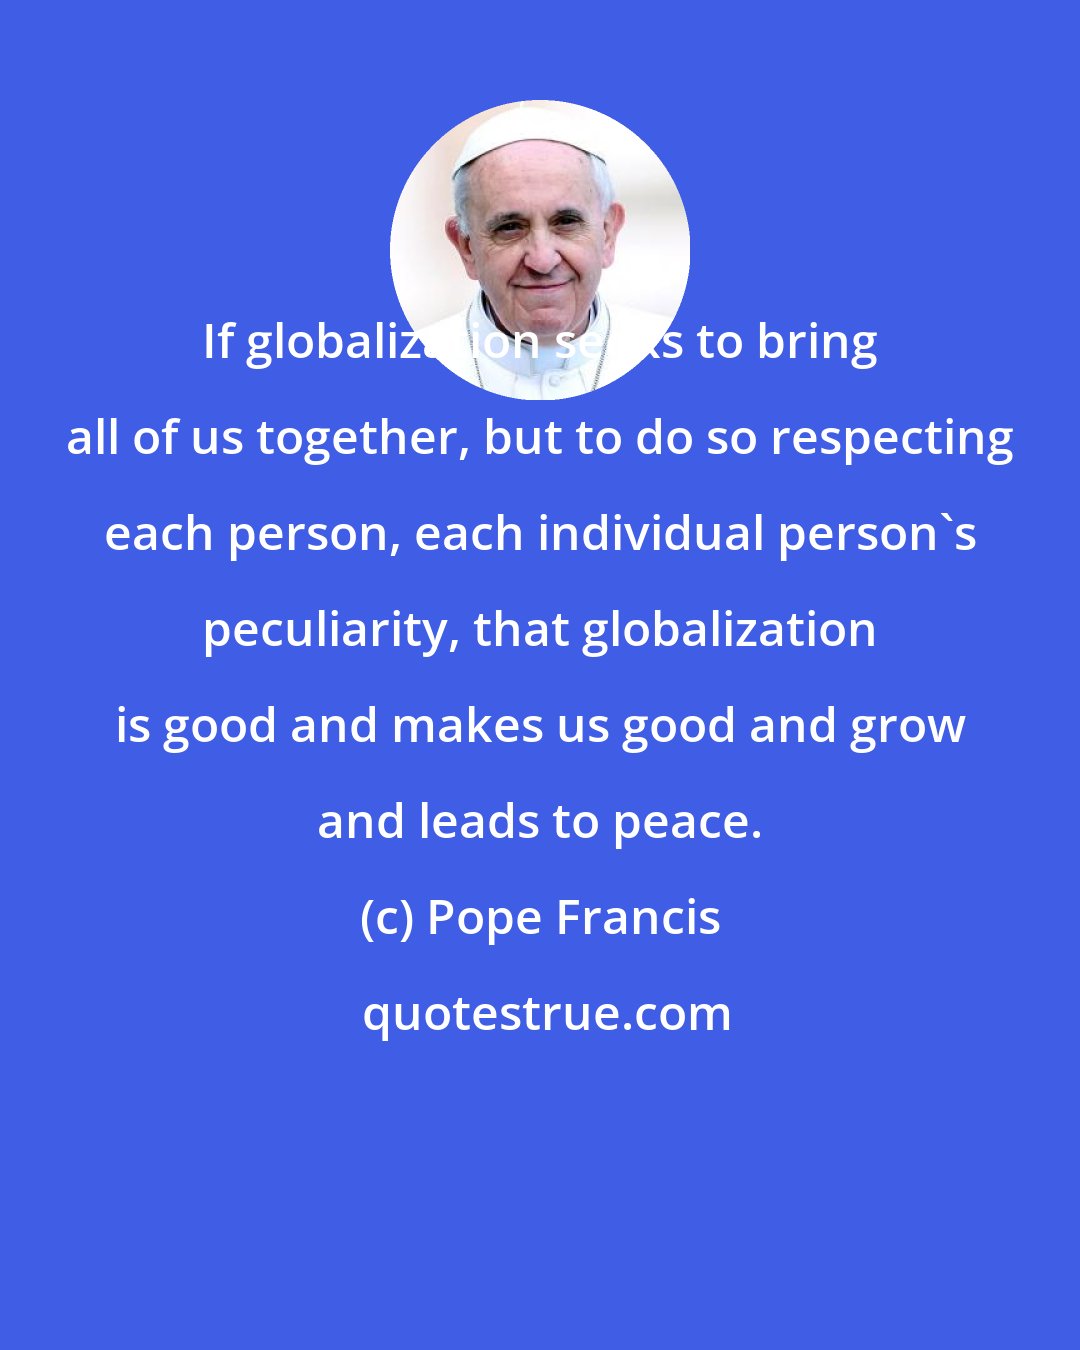 Pope Francis: If globalization seeks to bring all of us together, but to do so respecting each person, each individual person's peculiarity, that globalization is good and makes us good and grow and leads to peace.